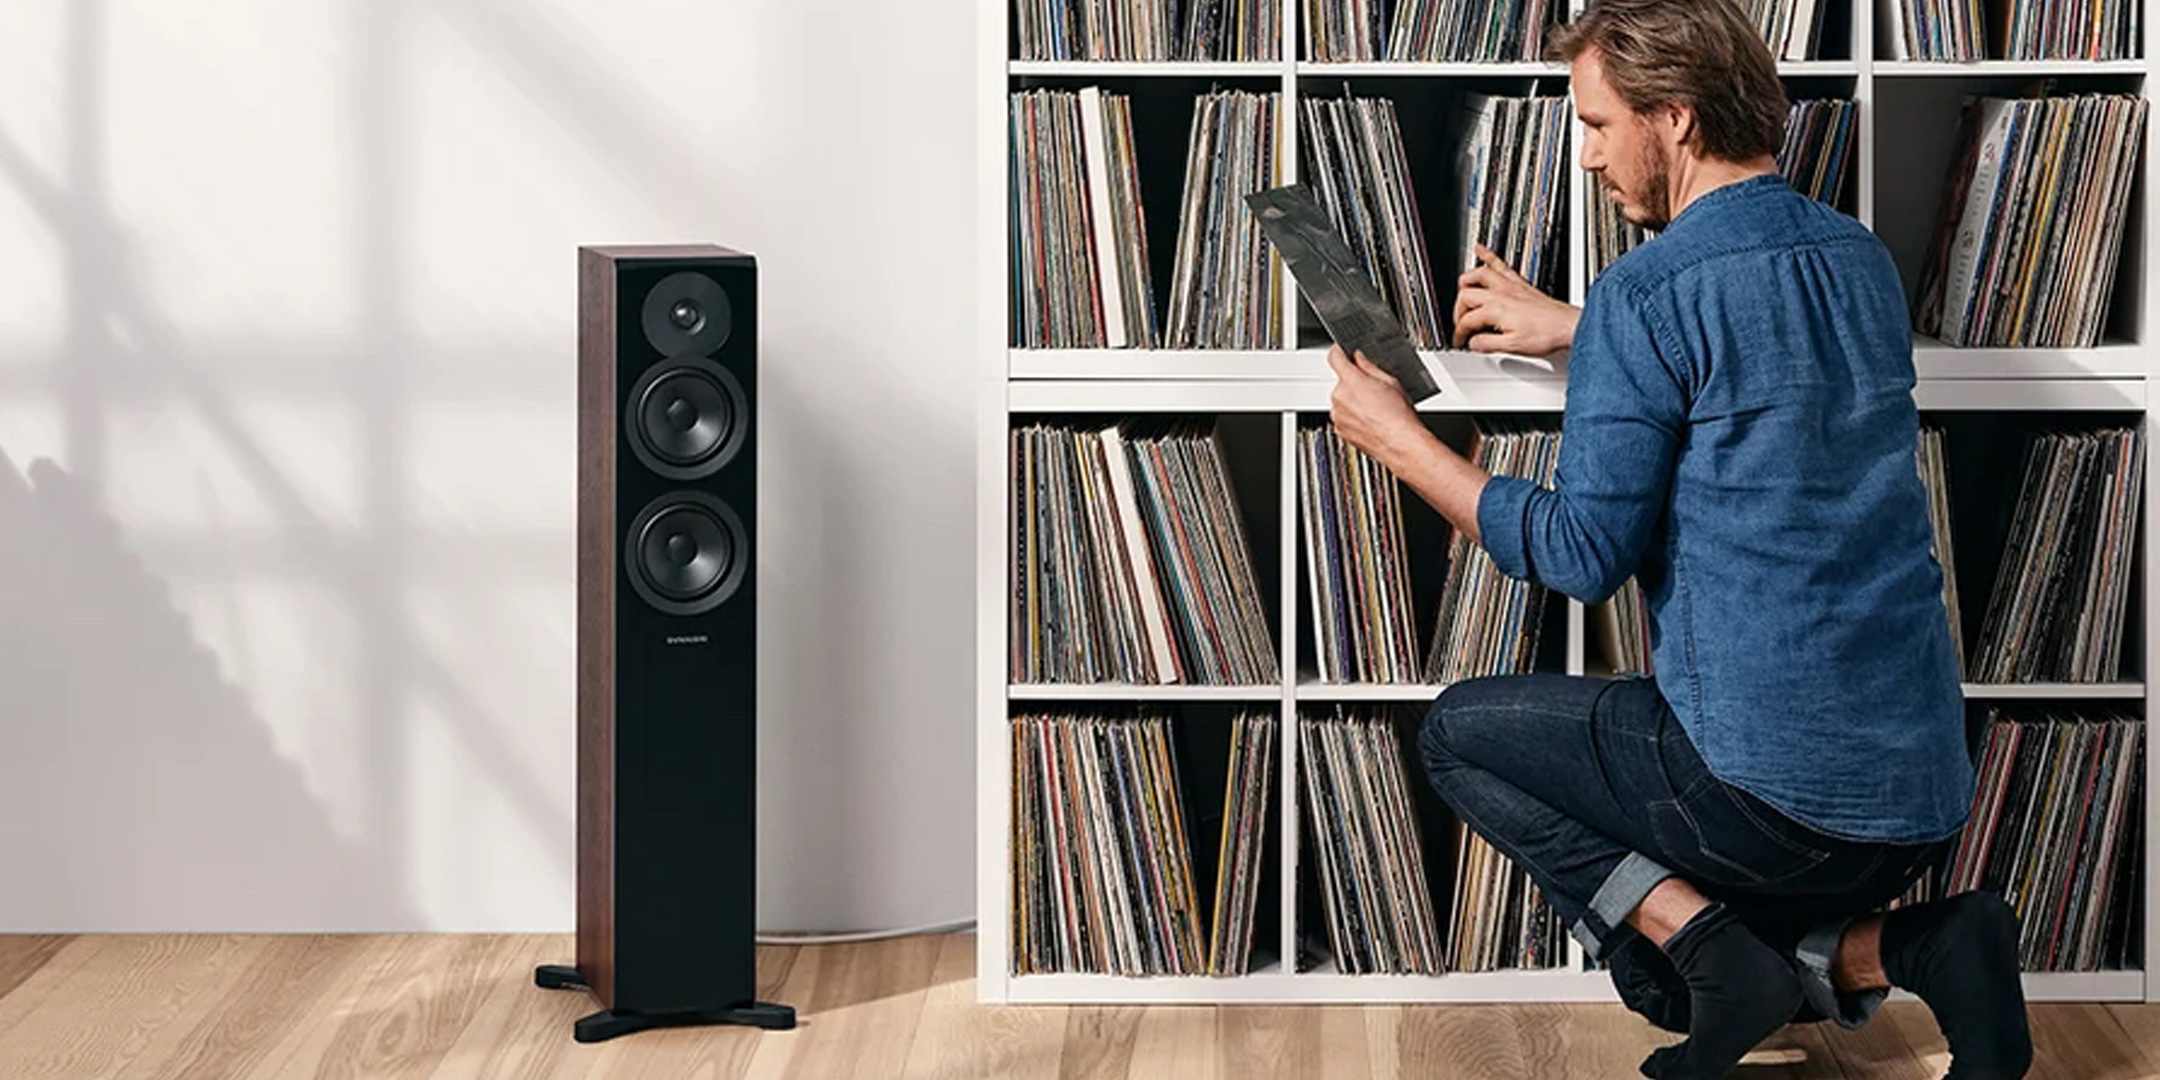 Pic showing a man kneeling at some shelves holding vinyl albums a Dynaudio Emit 30 speaker to his left